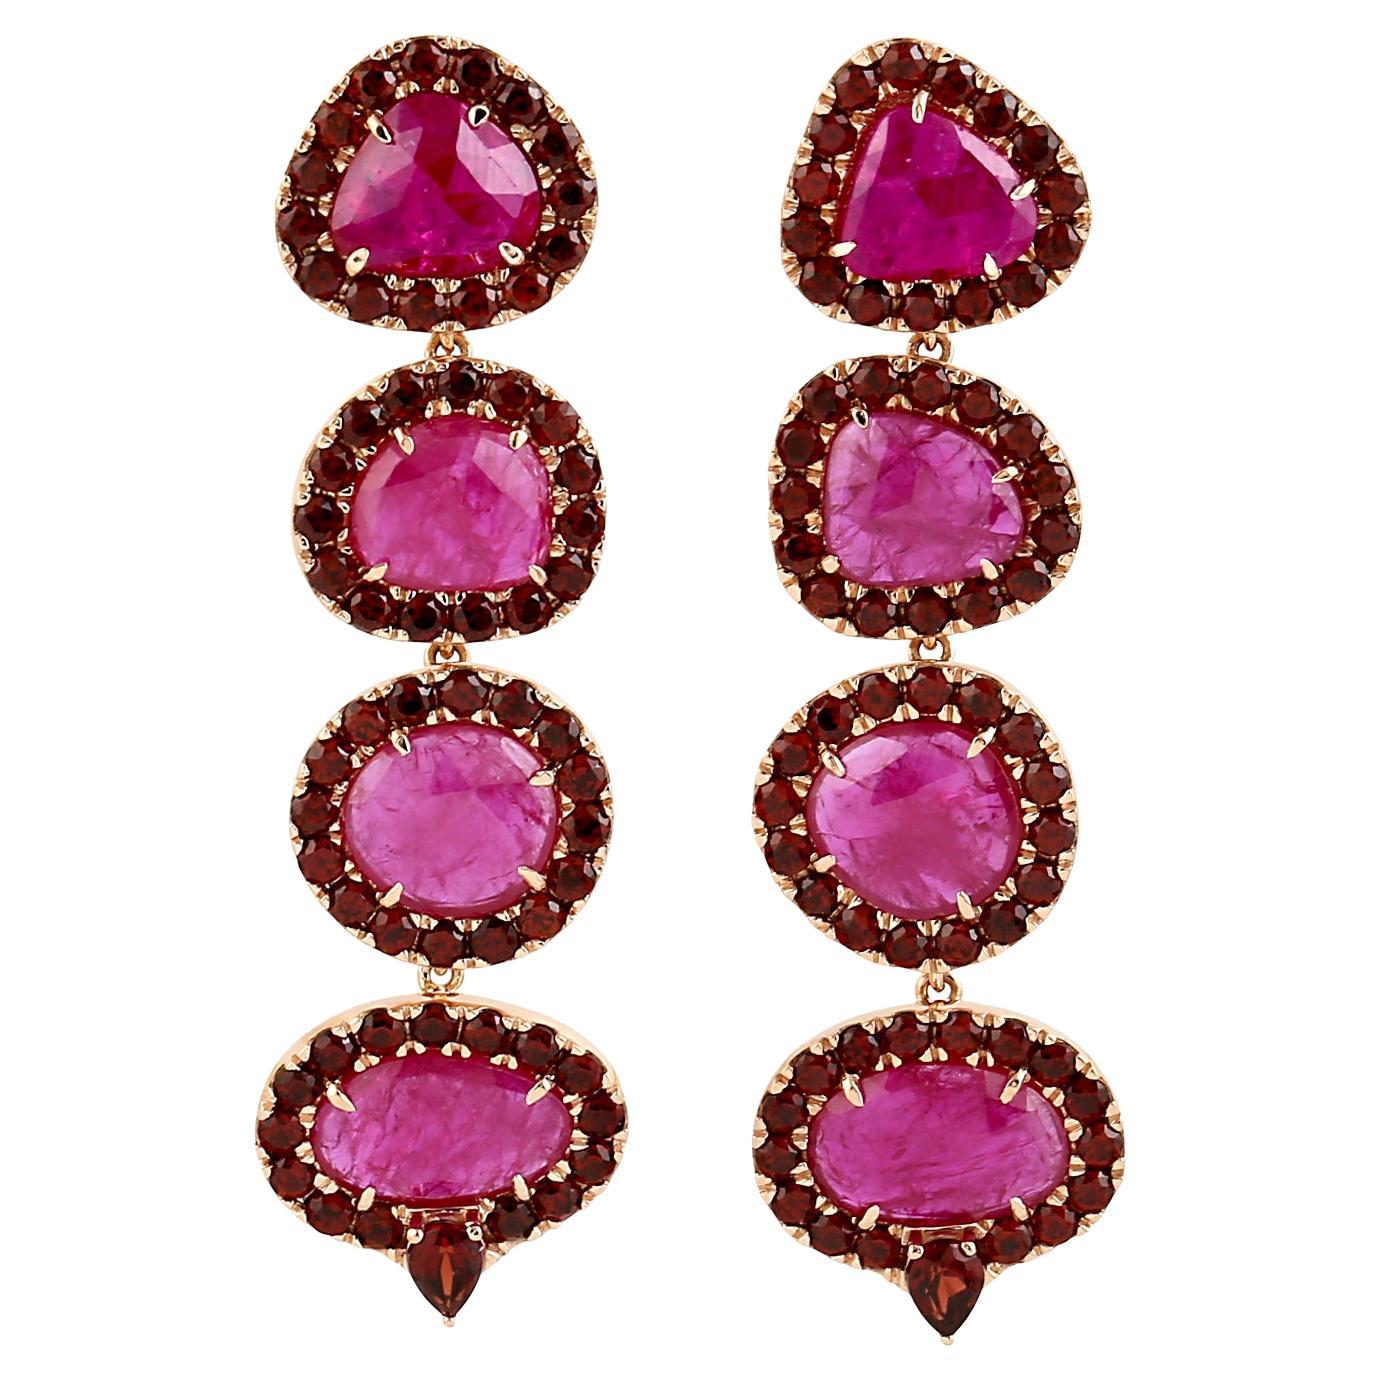 10.31 ct Ruby Dangle Earrings With Garnet Made In 18k Yellow Gold